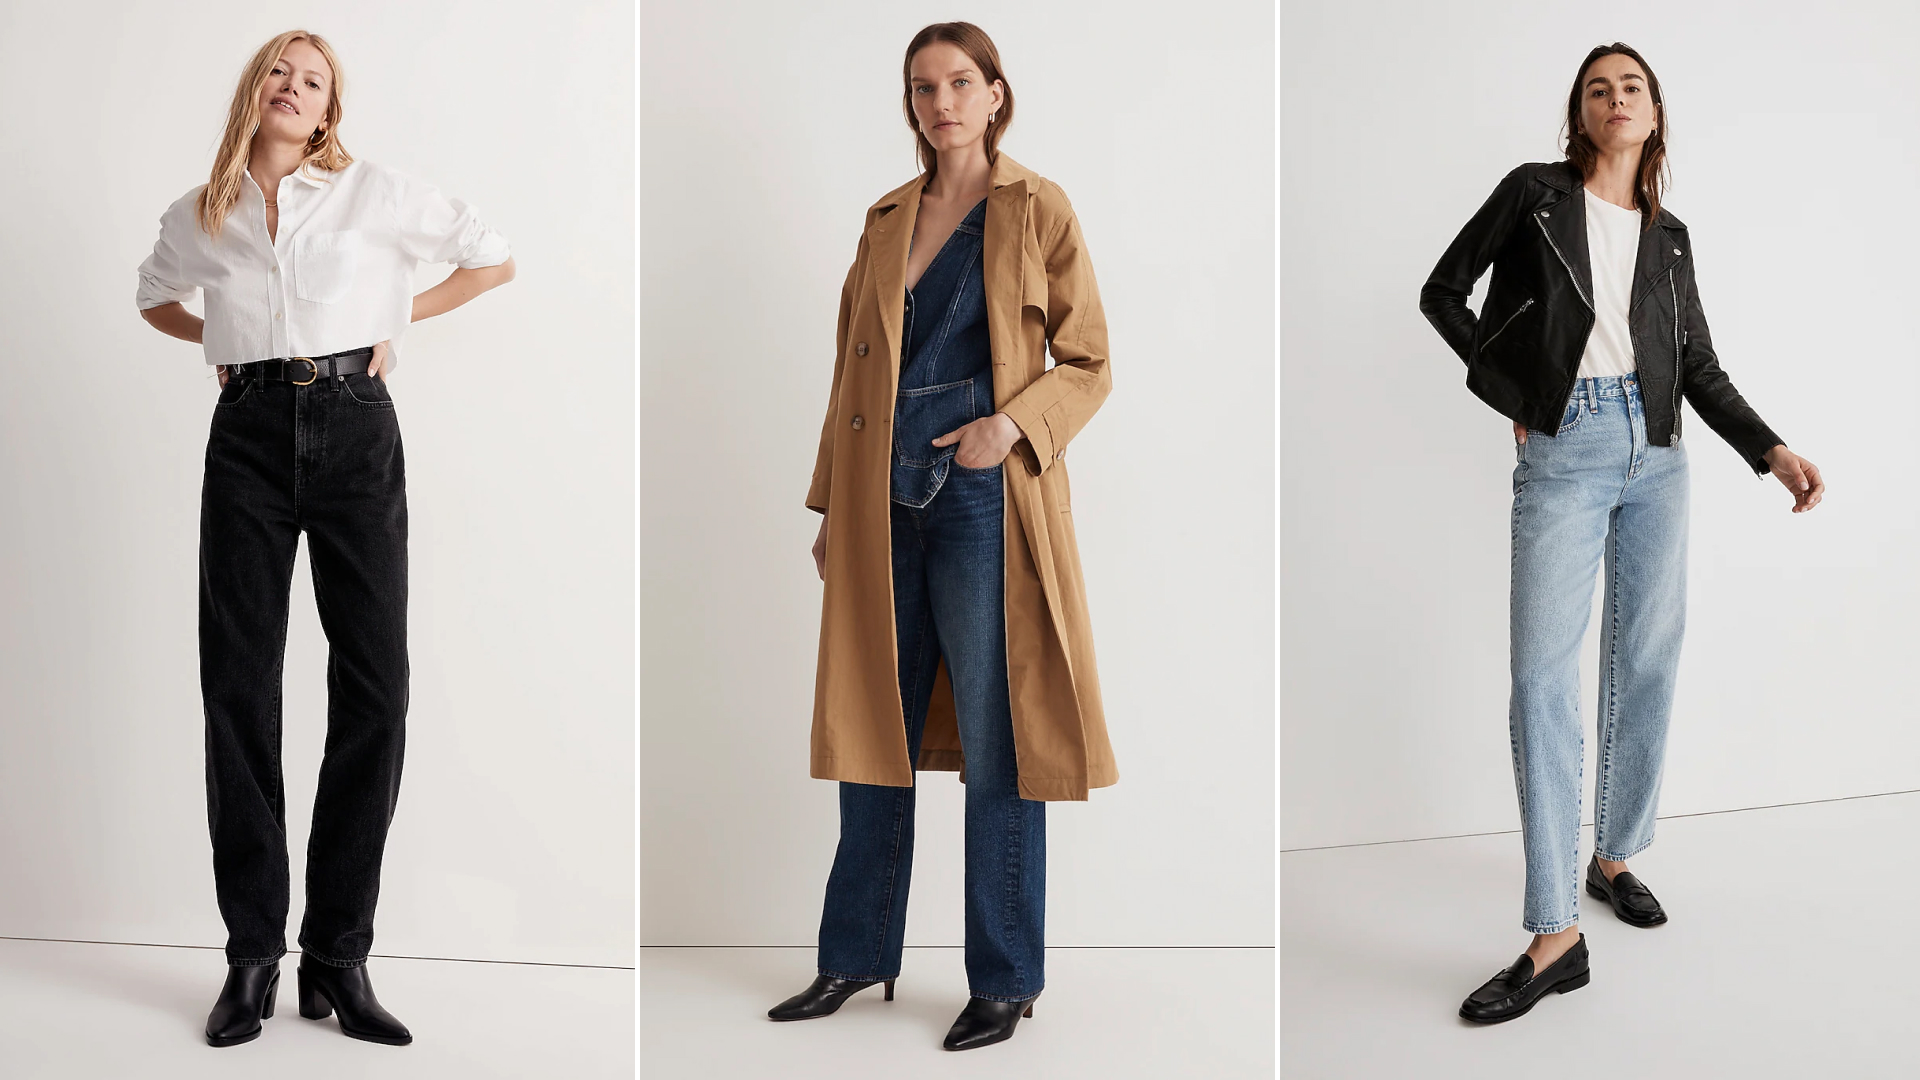 Madewell sale: Save 25% on jeans and fall fashion essentials